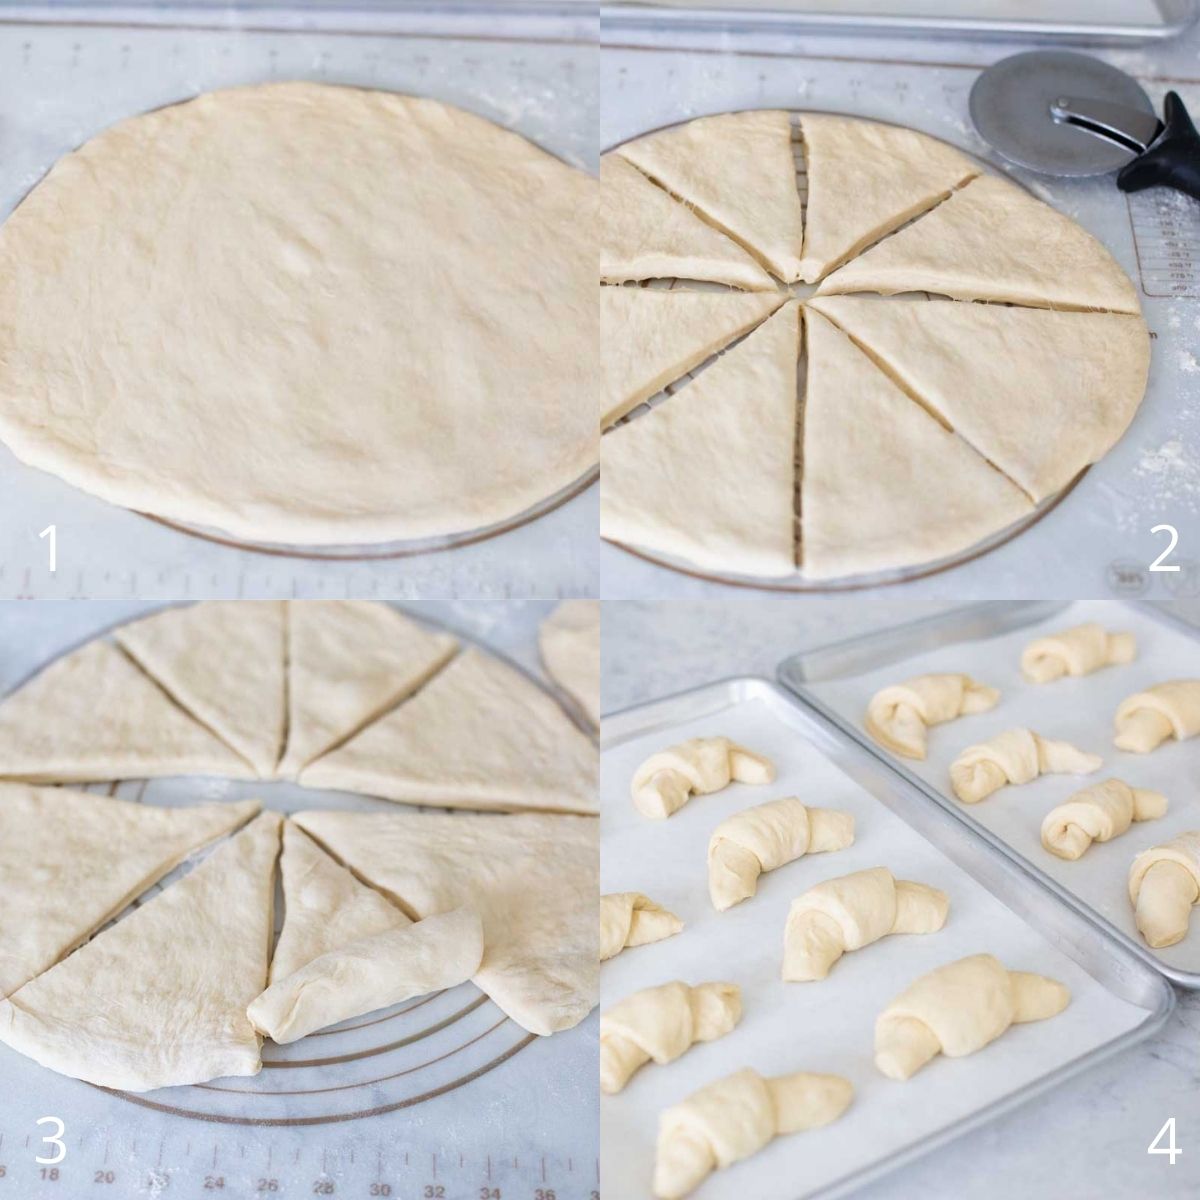 Step by step photos show how to divide the dough and roll a crescent dinner roll.